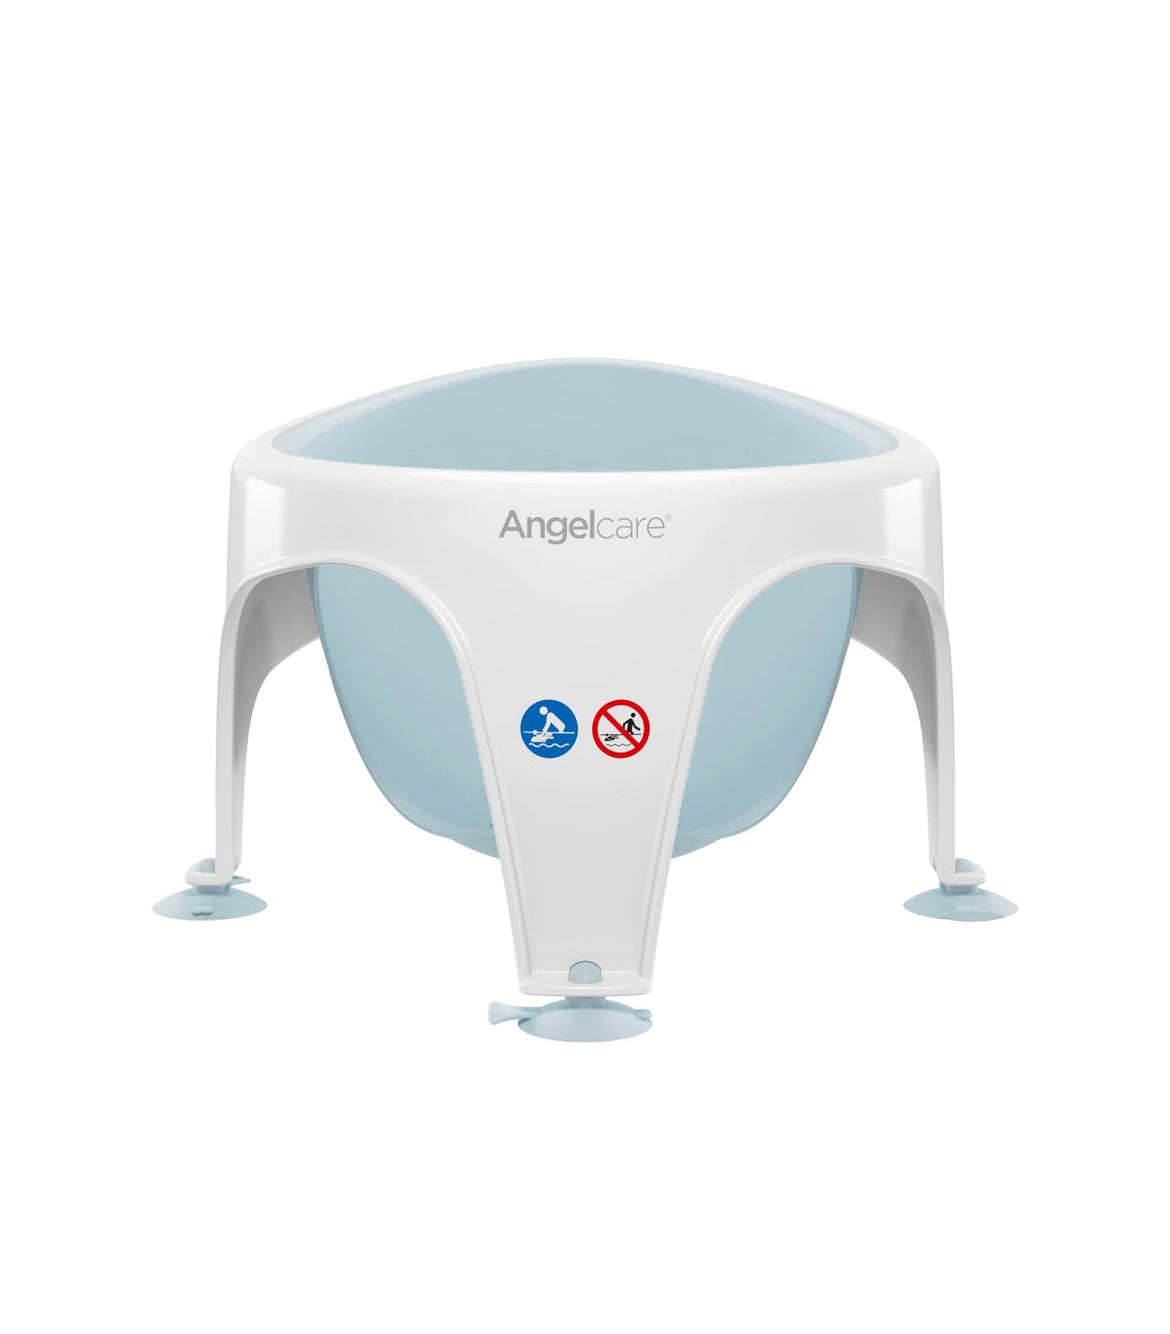 AngelCare Bath Seat For Baby.